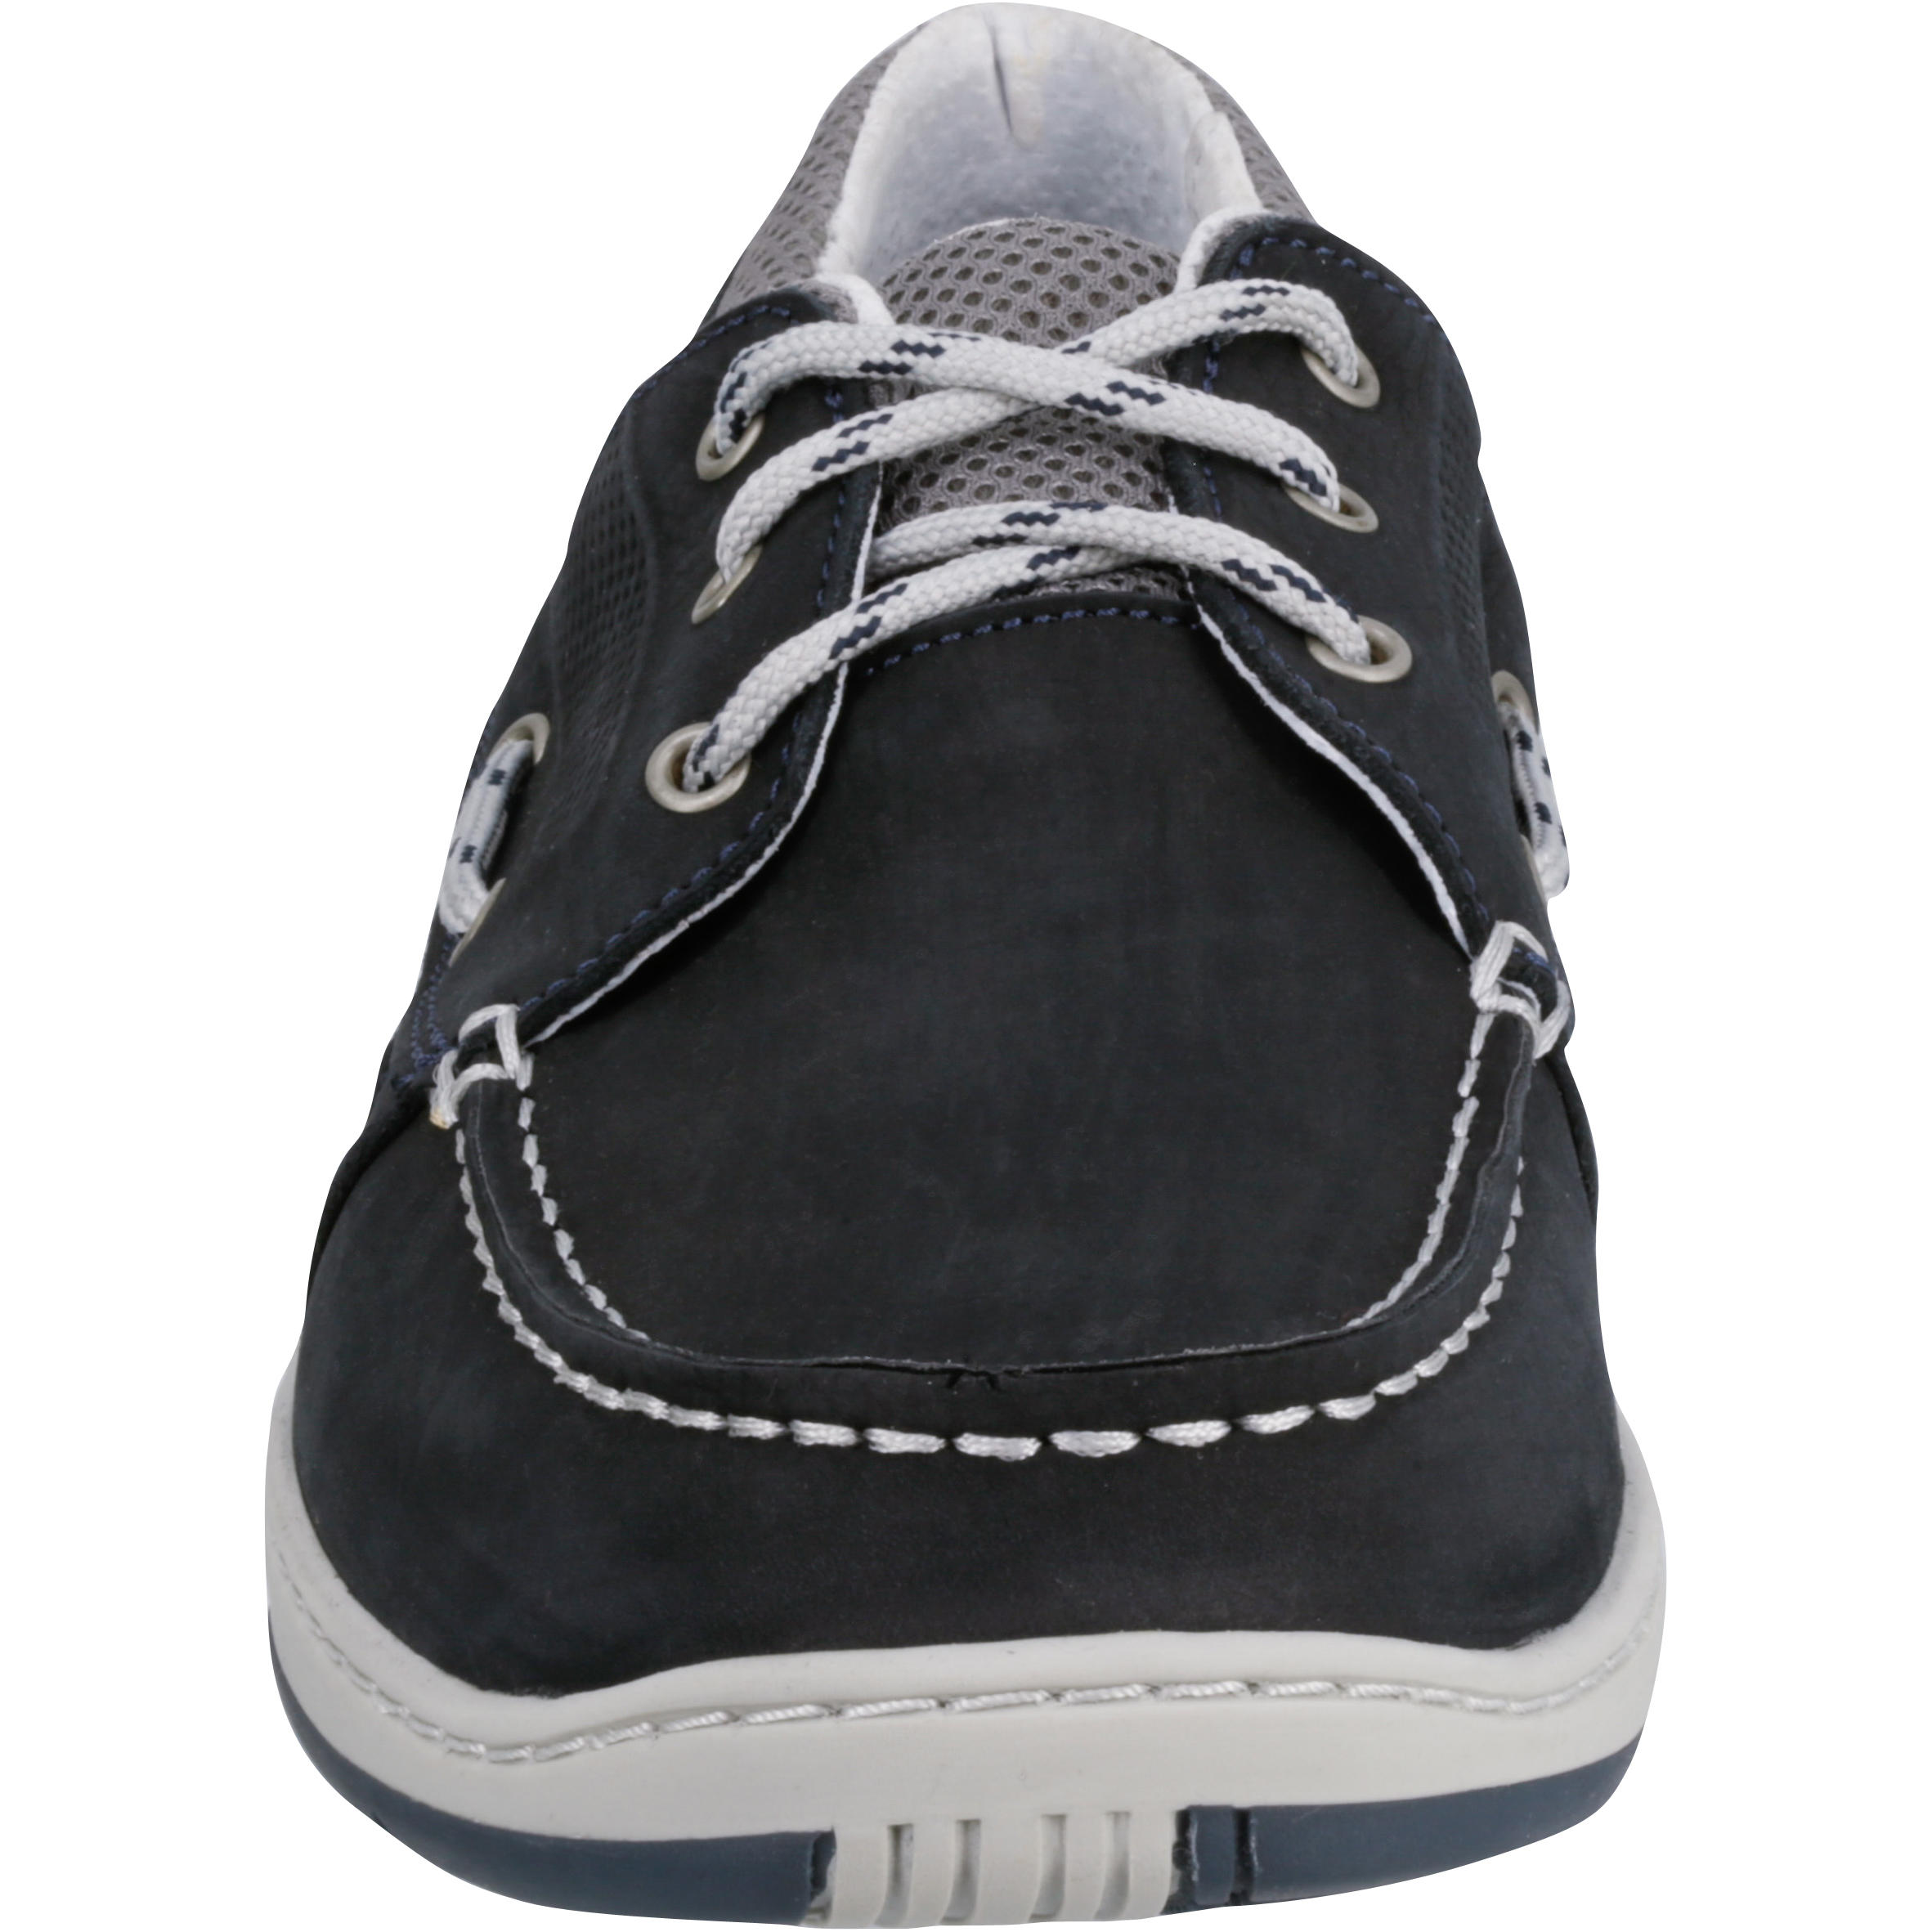 Leather Boat Shoes – Men’s - TRIBORD